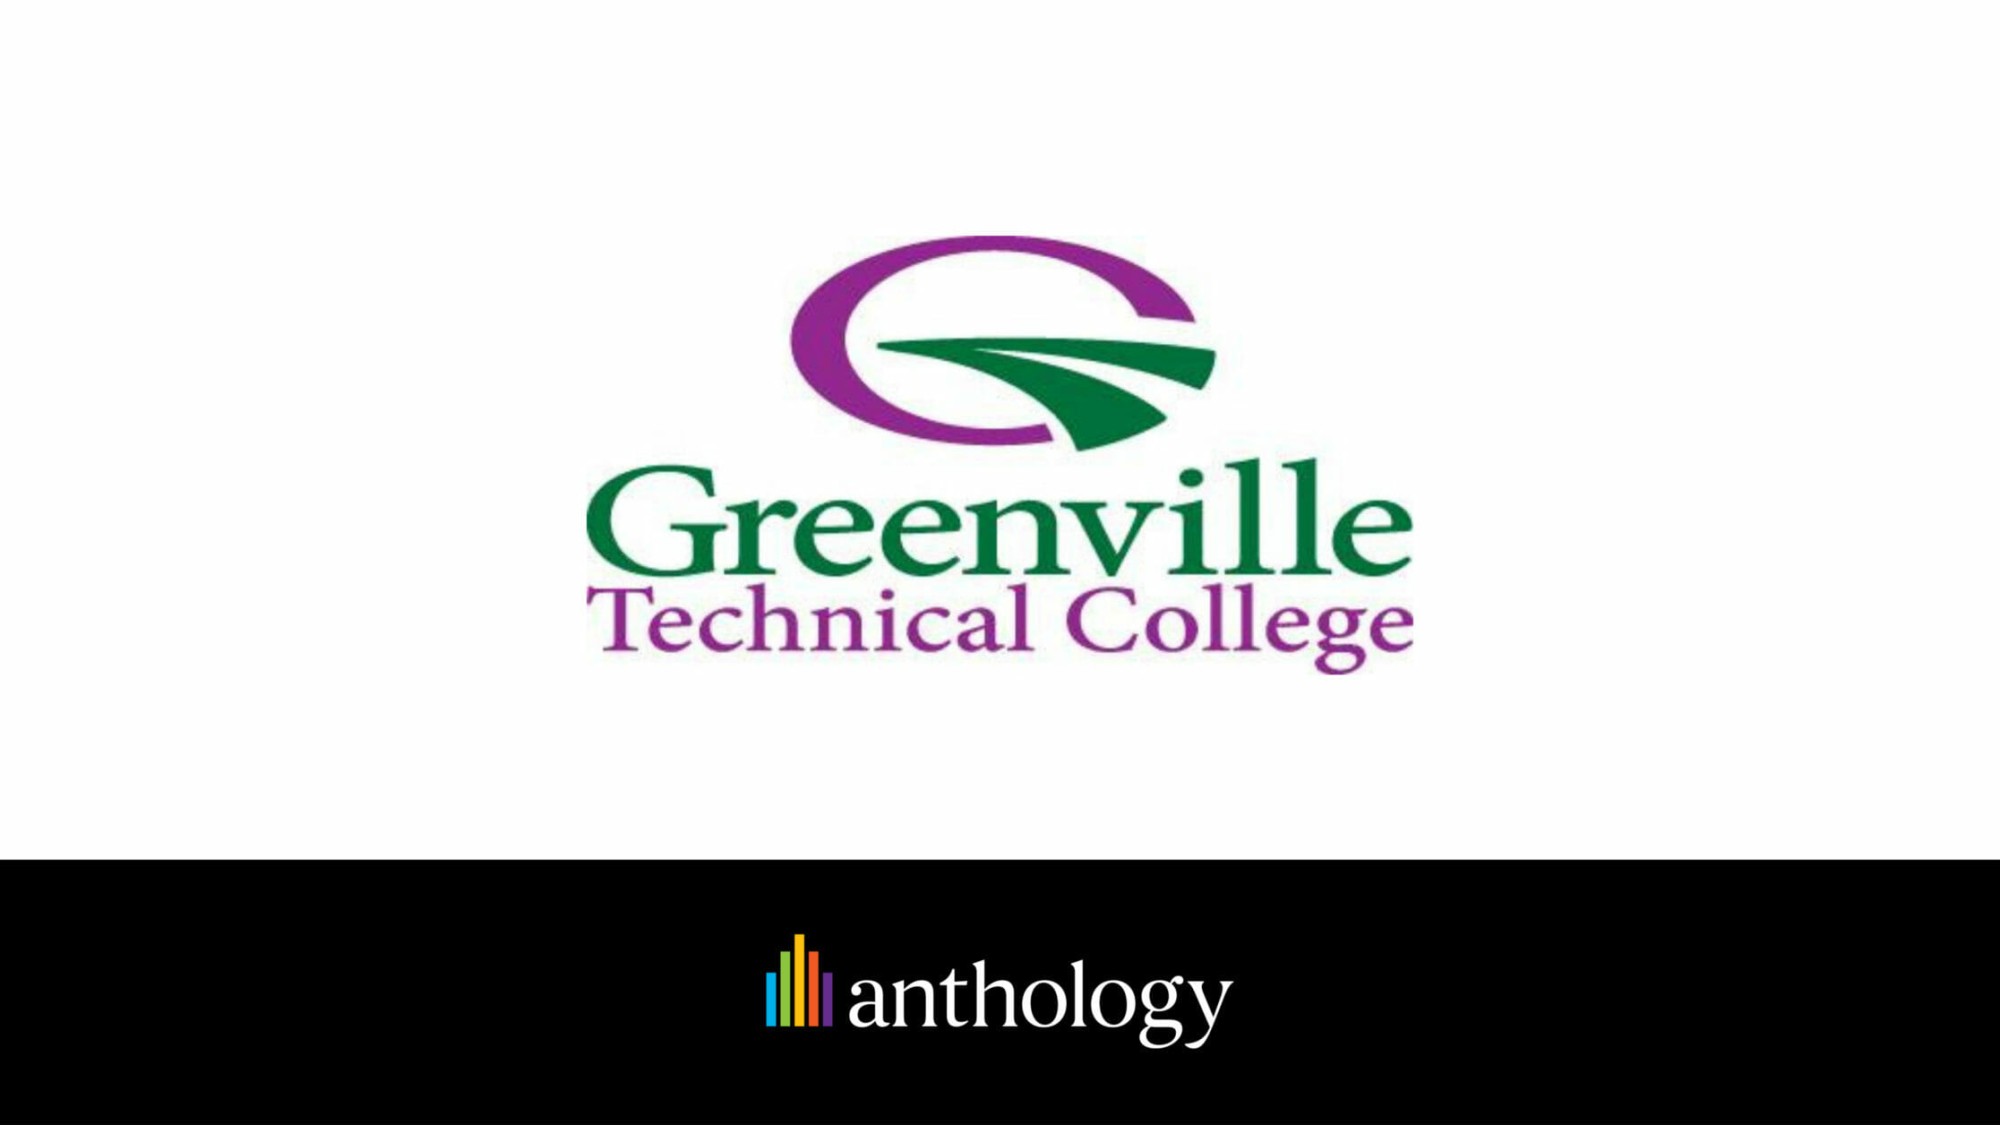 Greenville Technical College logo lockup with the Anthology logo